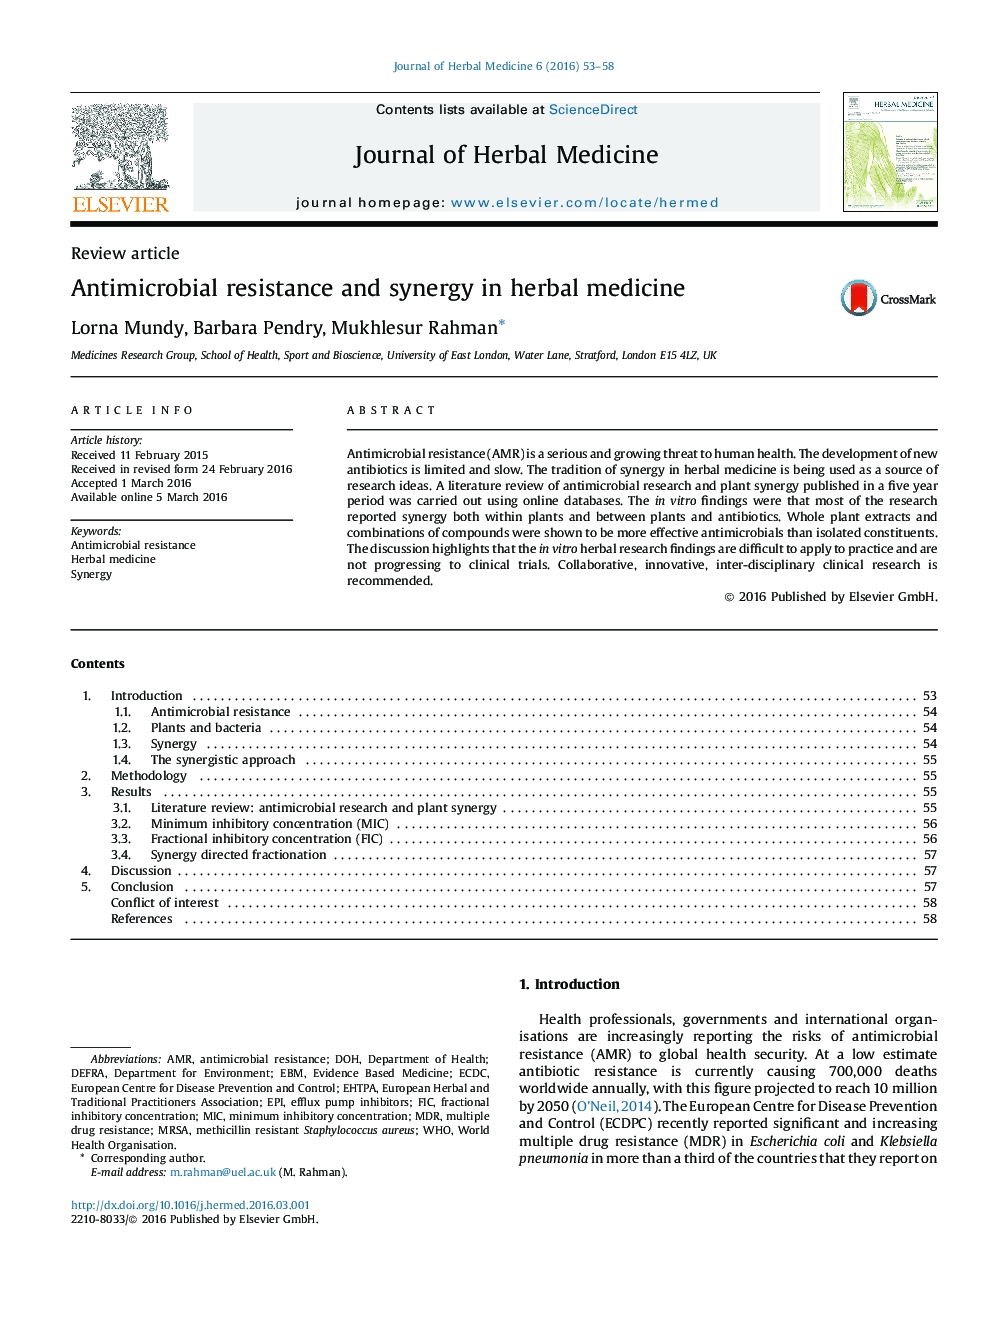 Antimicrobial resistance and synergy in herbal medicine